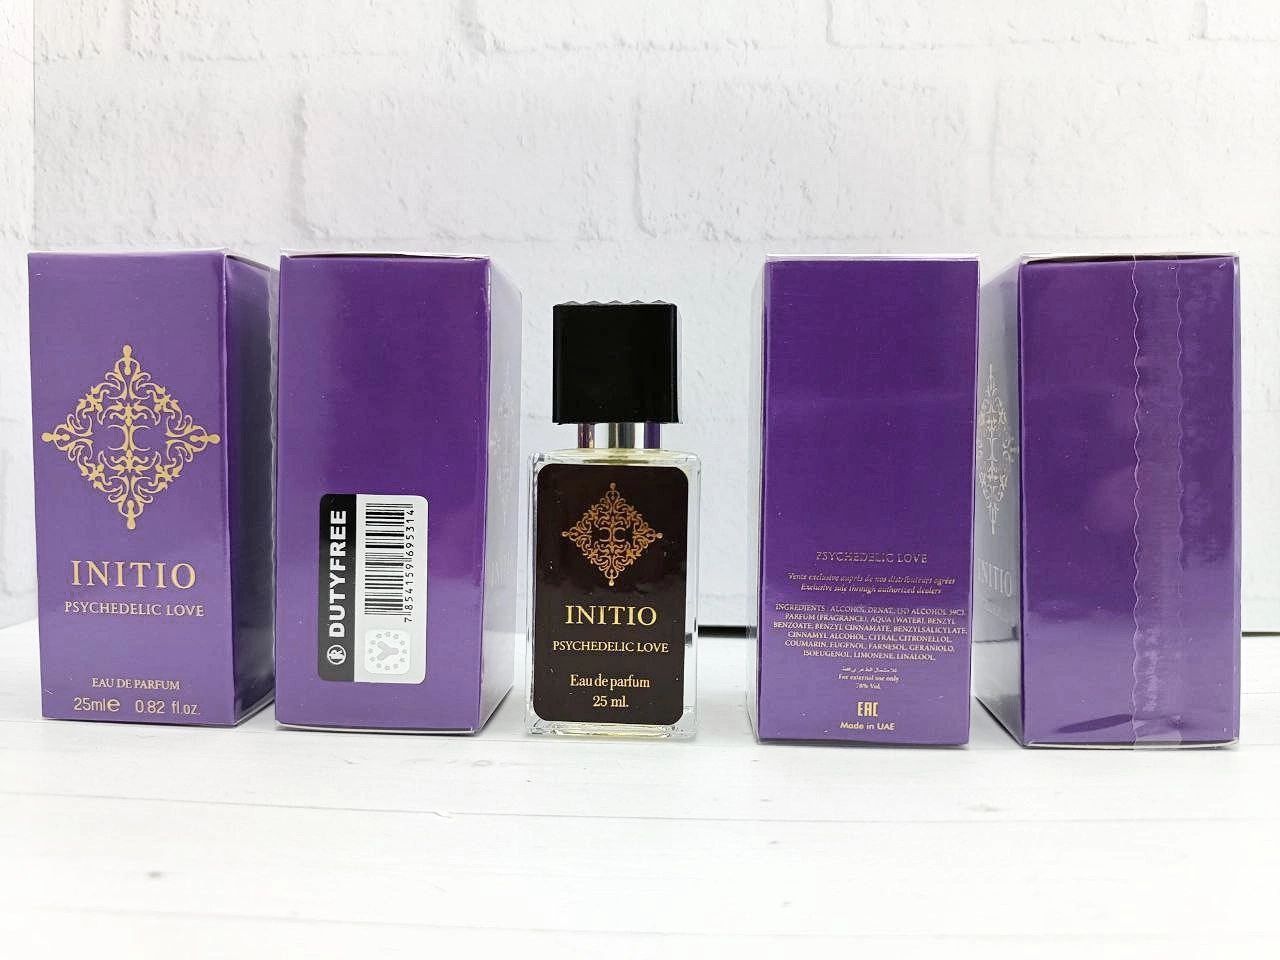 Prives psychedelic love. Inito Psychedelic Love 25 мл. Психоделик Парфюм. Инитио психоделик. Psychedelic Love Initio Parfums prives.